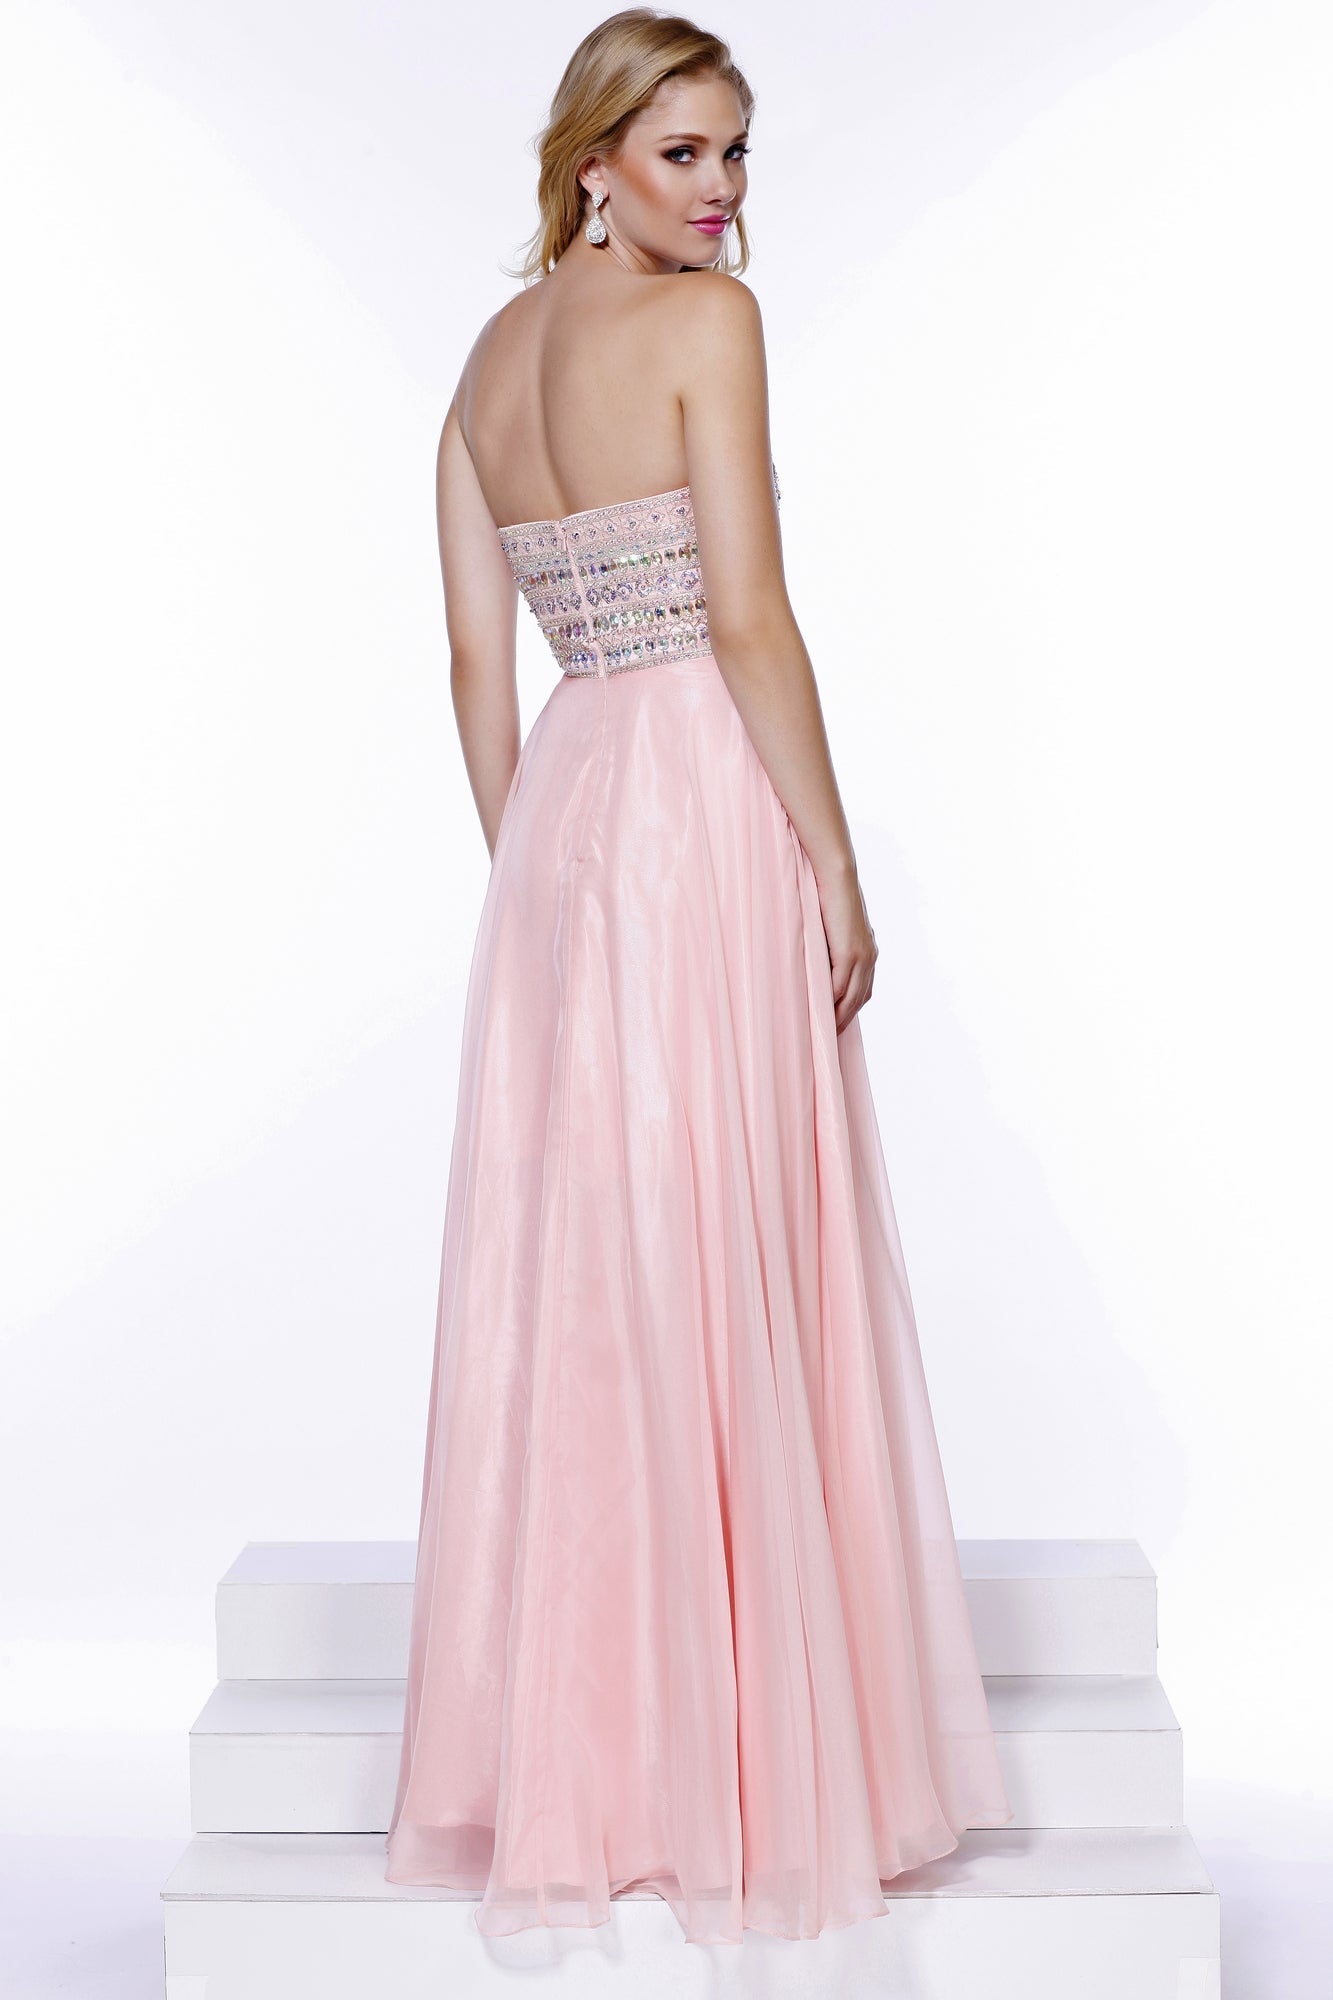  Beaded Strapless Bodice Long A-Line Prom Gown